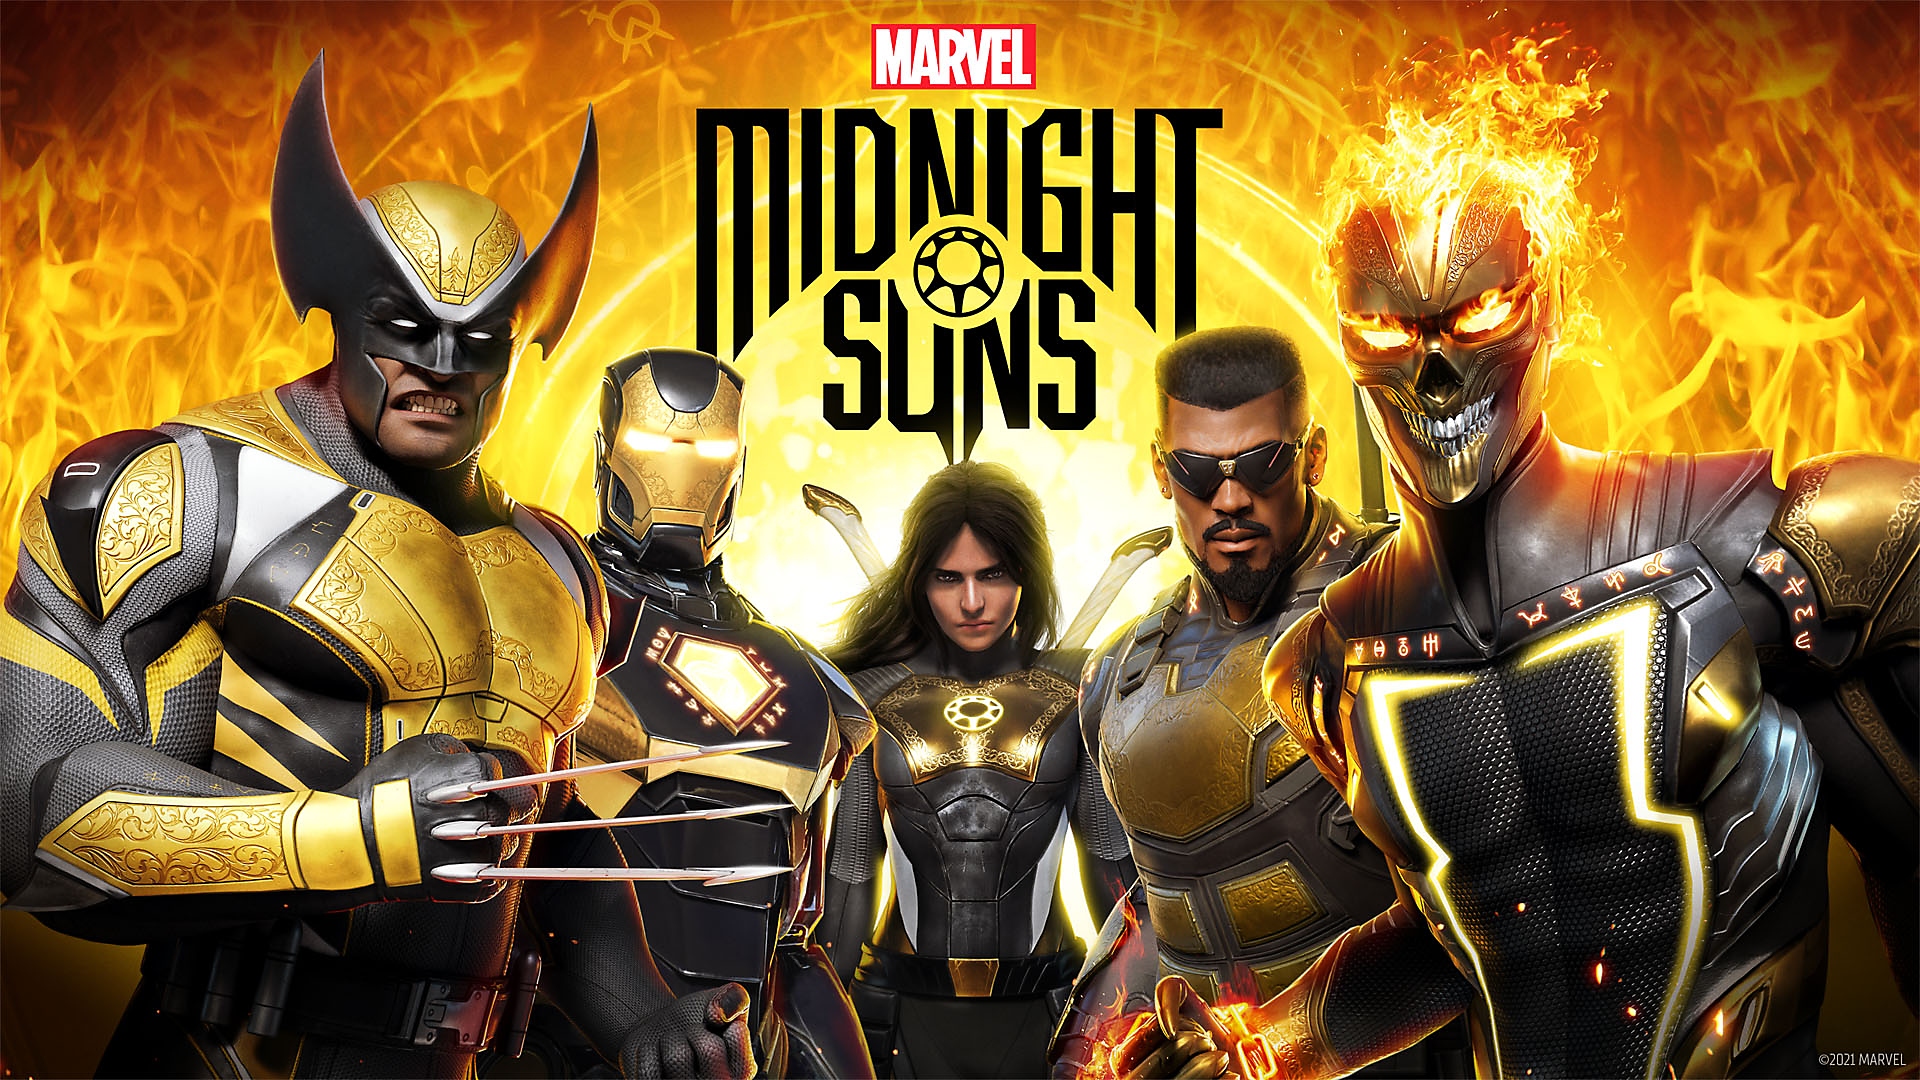 Marvels Midnight Suns - Gameplay Trailer | PS5, PS4